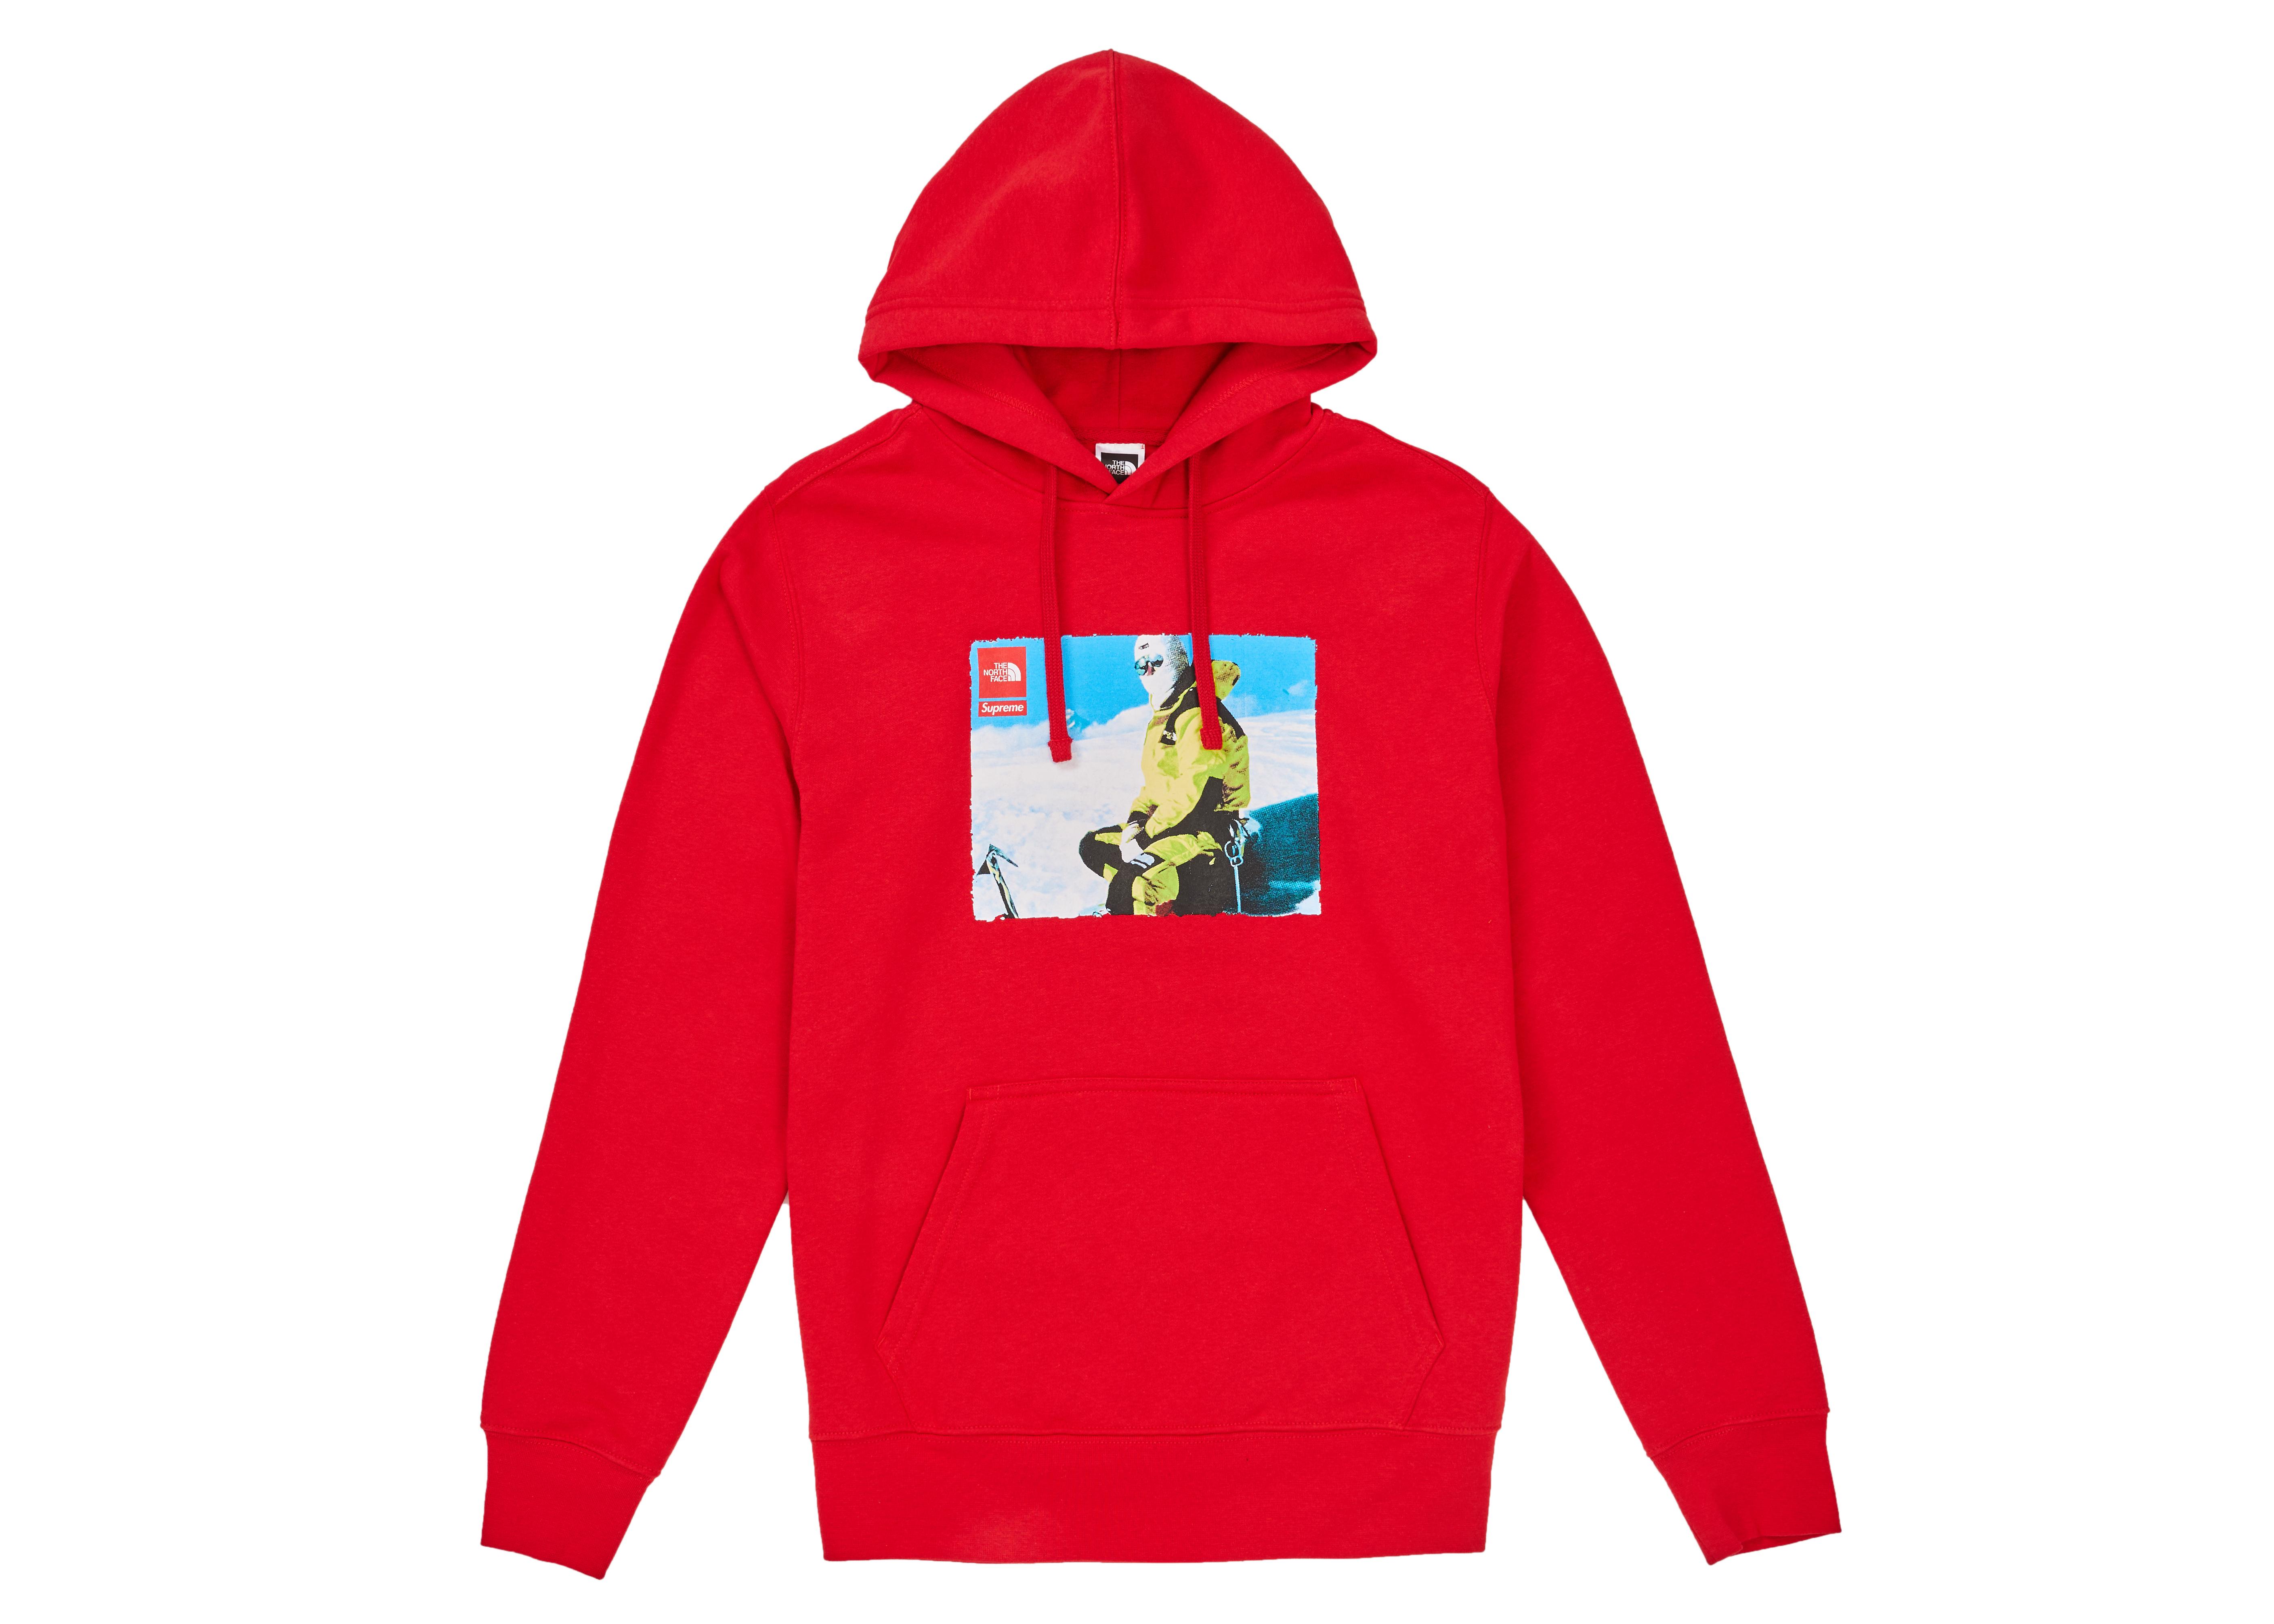 Lyst - Supreme The North Face Photo Hooded Sweatshirt Red in Red for Men